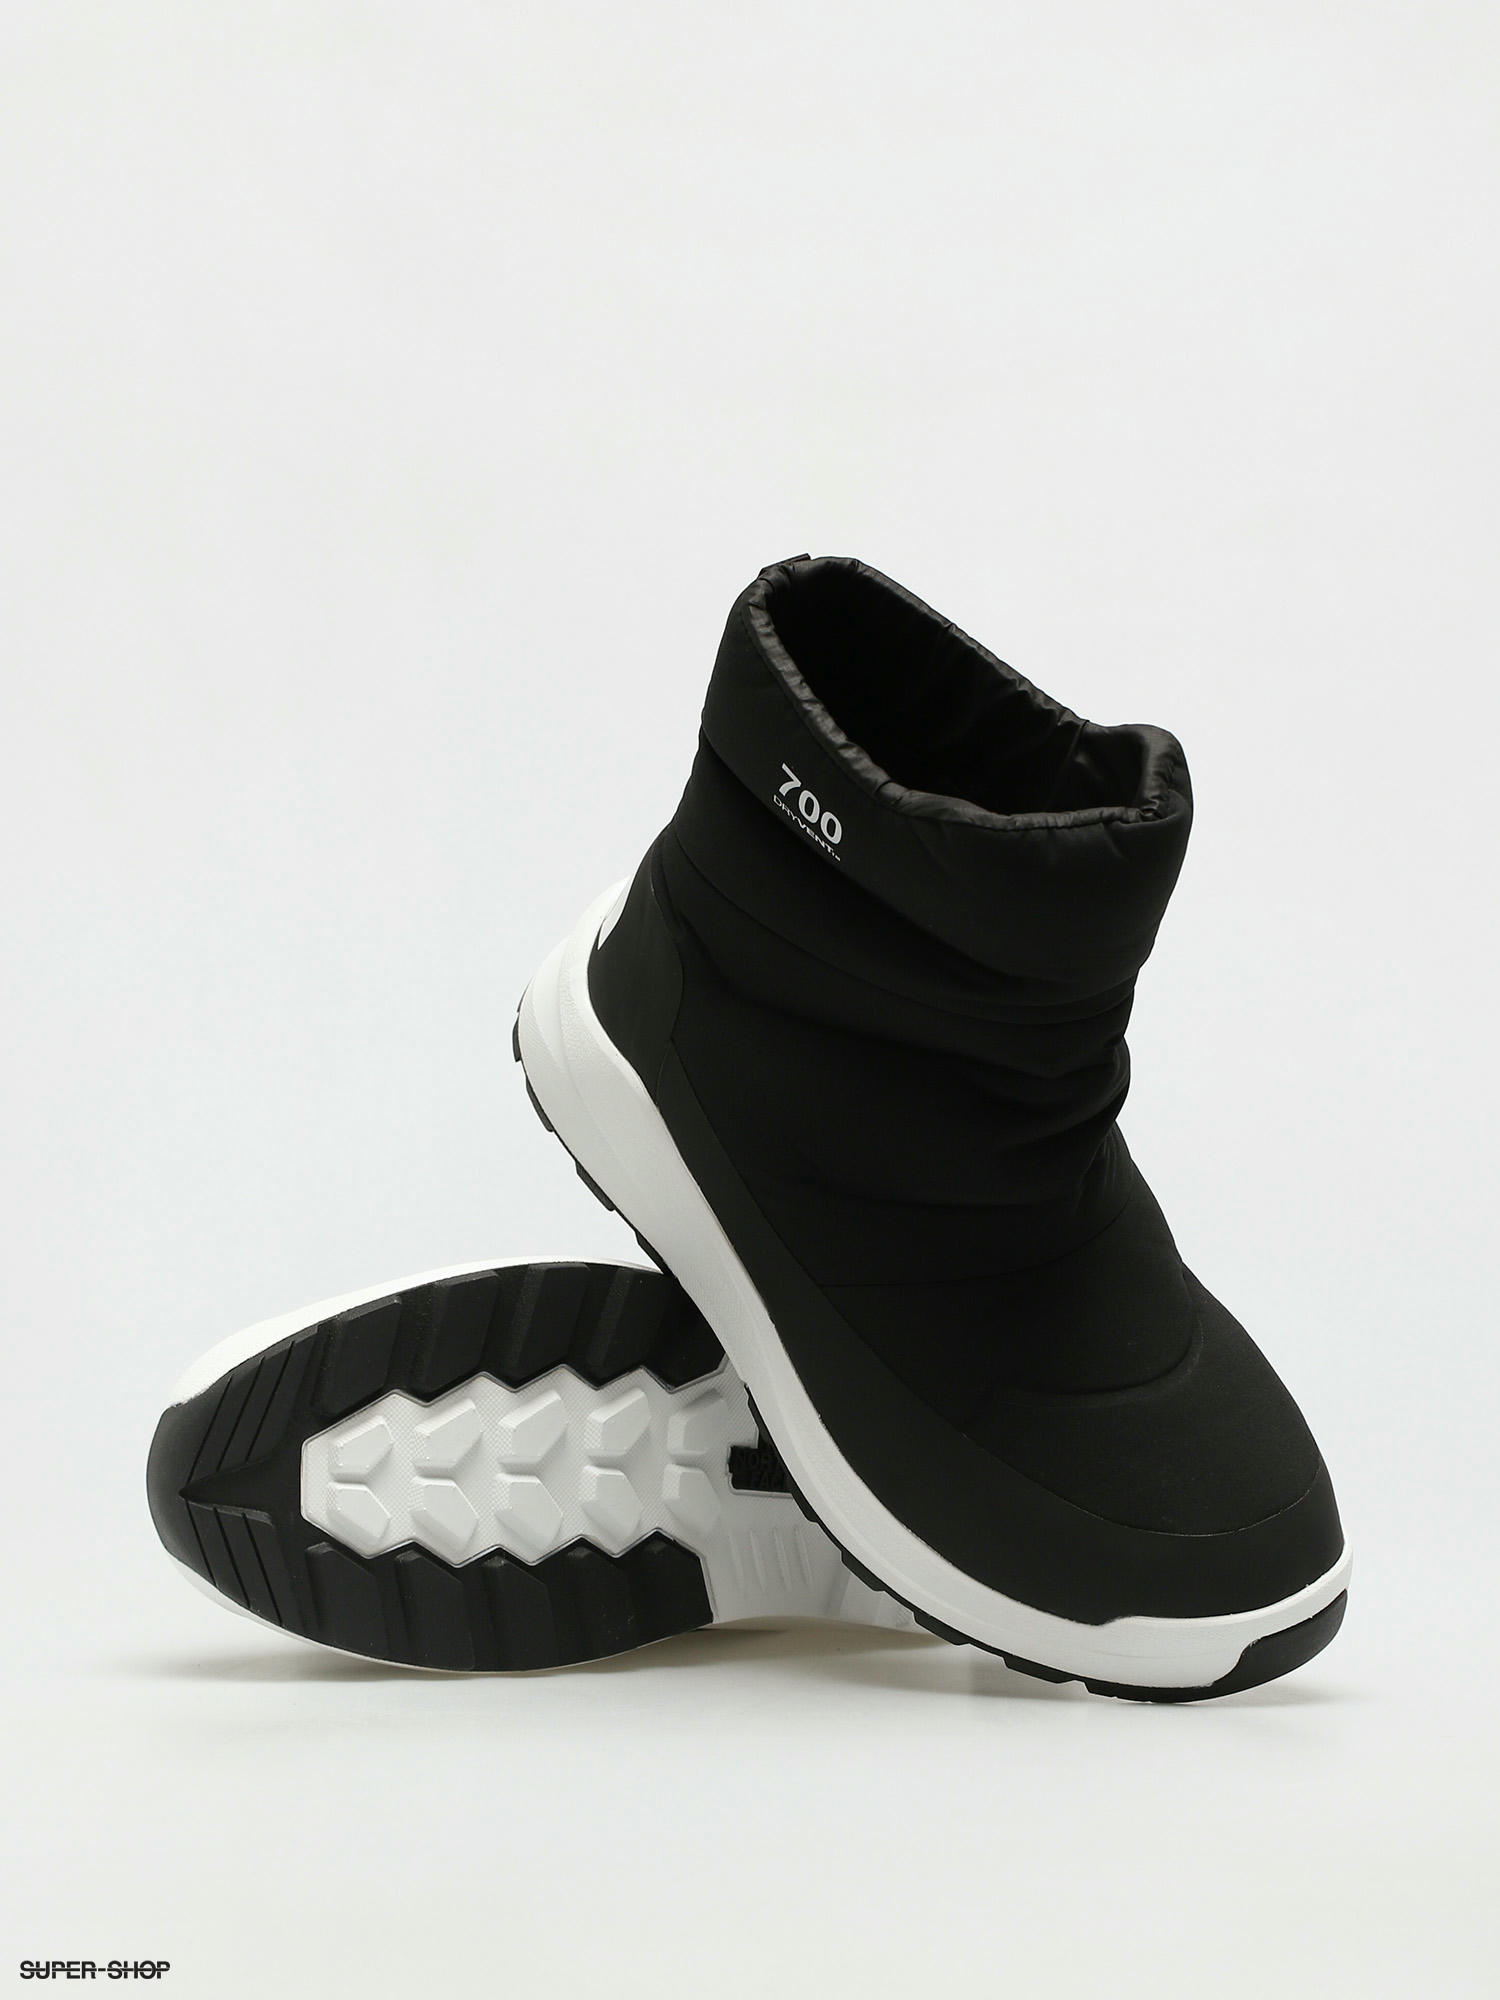 The North Face Nuptse II Bootie WP 700 Shoes (tnf black/tnf white)